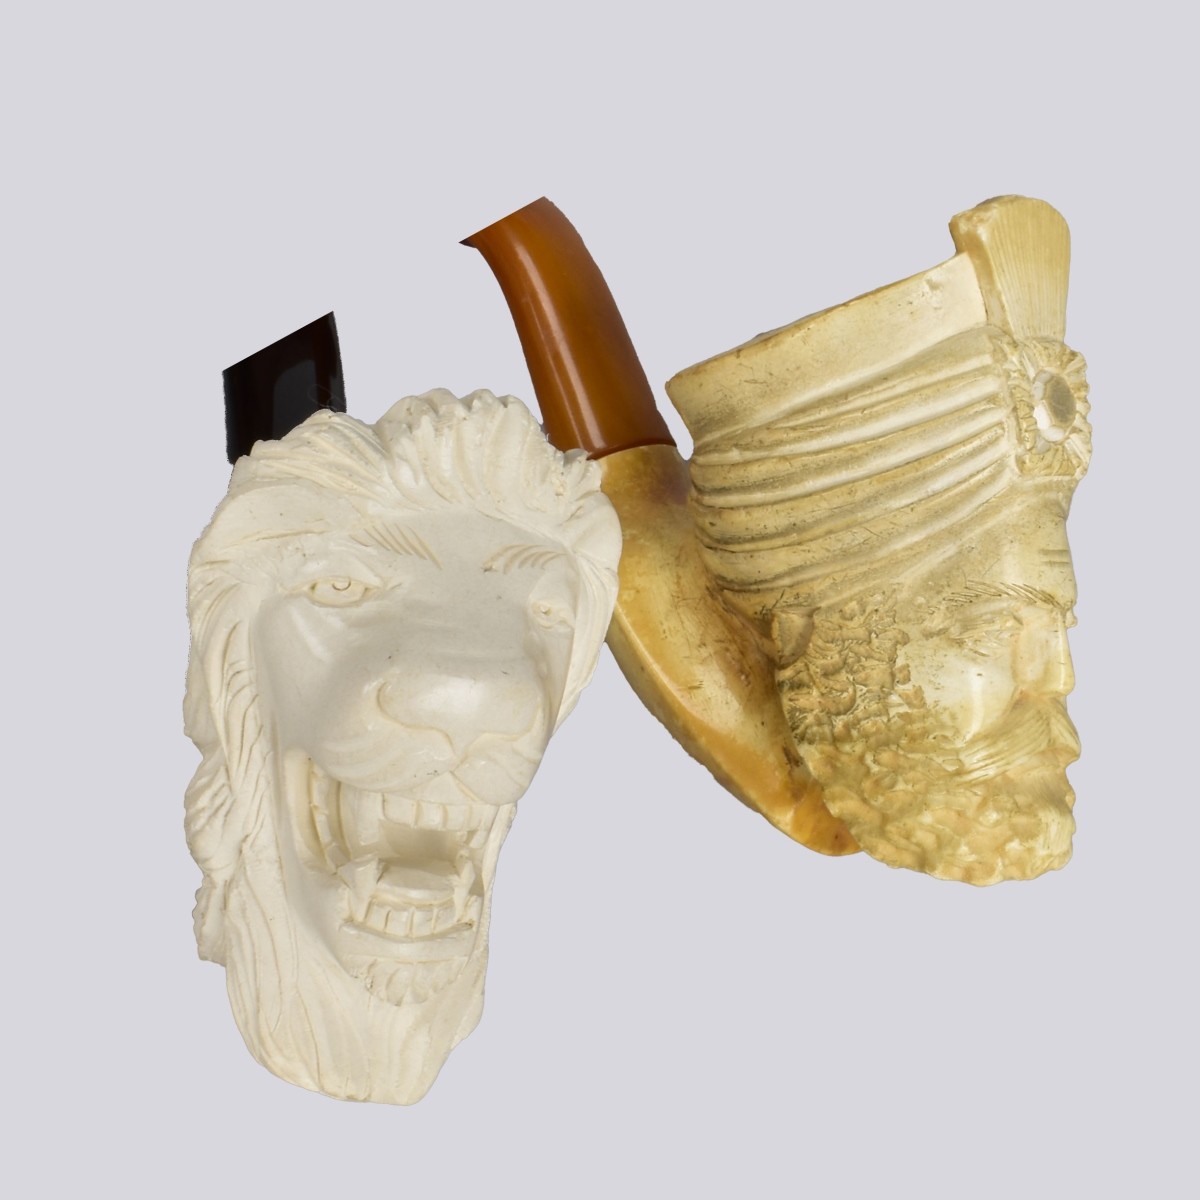 Two Carved Meerschaum Pipes